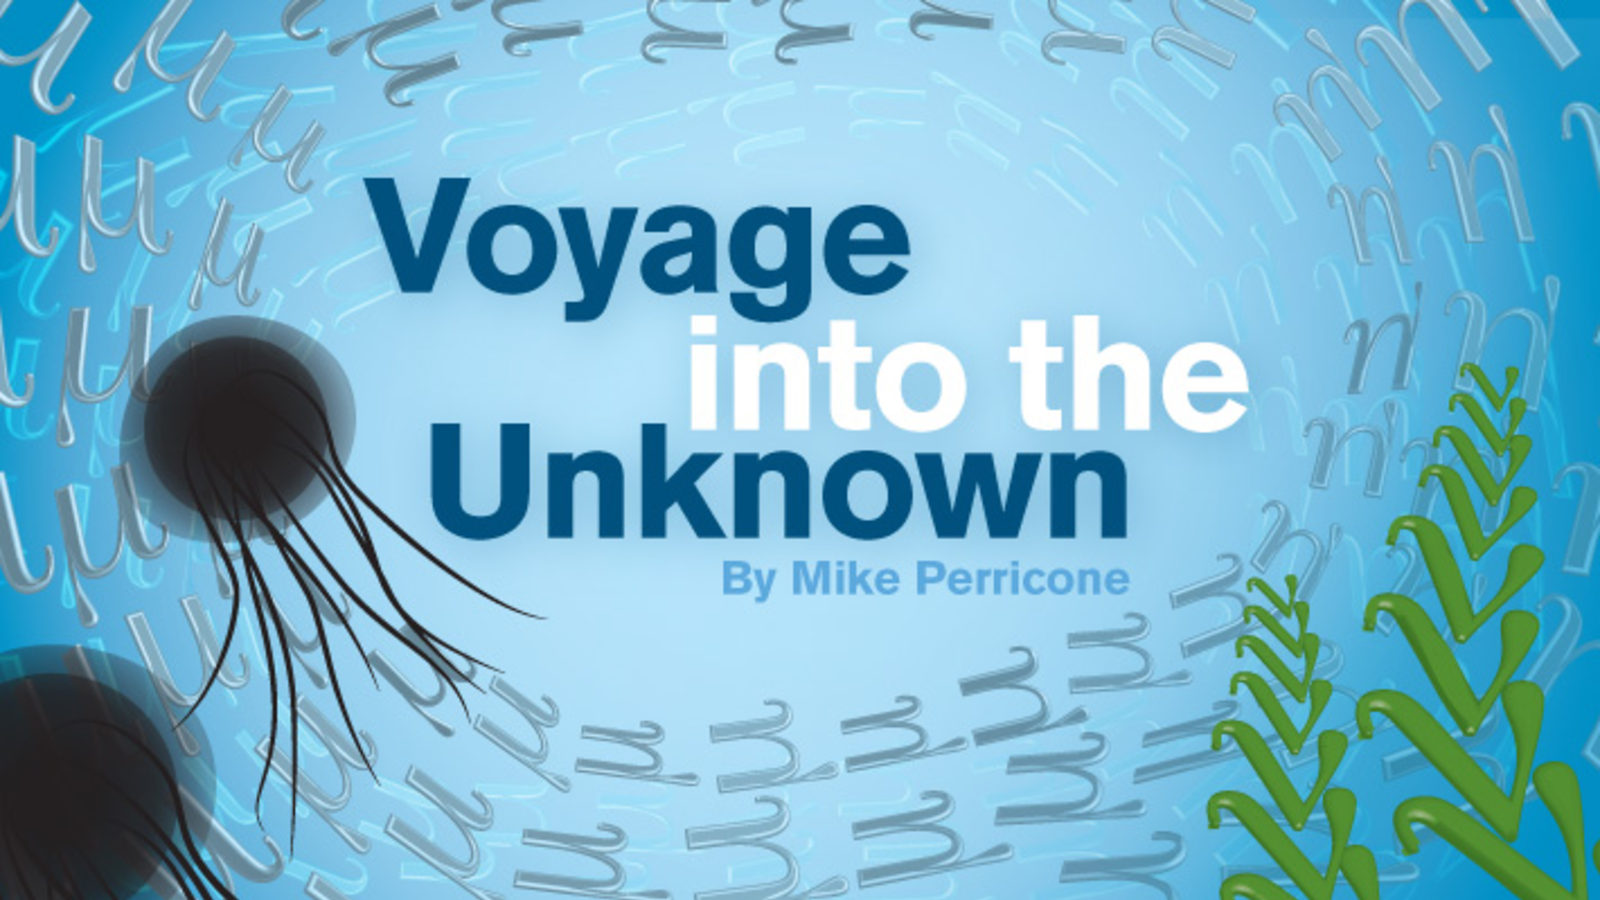 Illustration of underwater jelly fish, muons, neutrinos, "Voyage into the unknown"